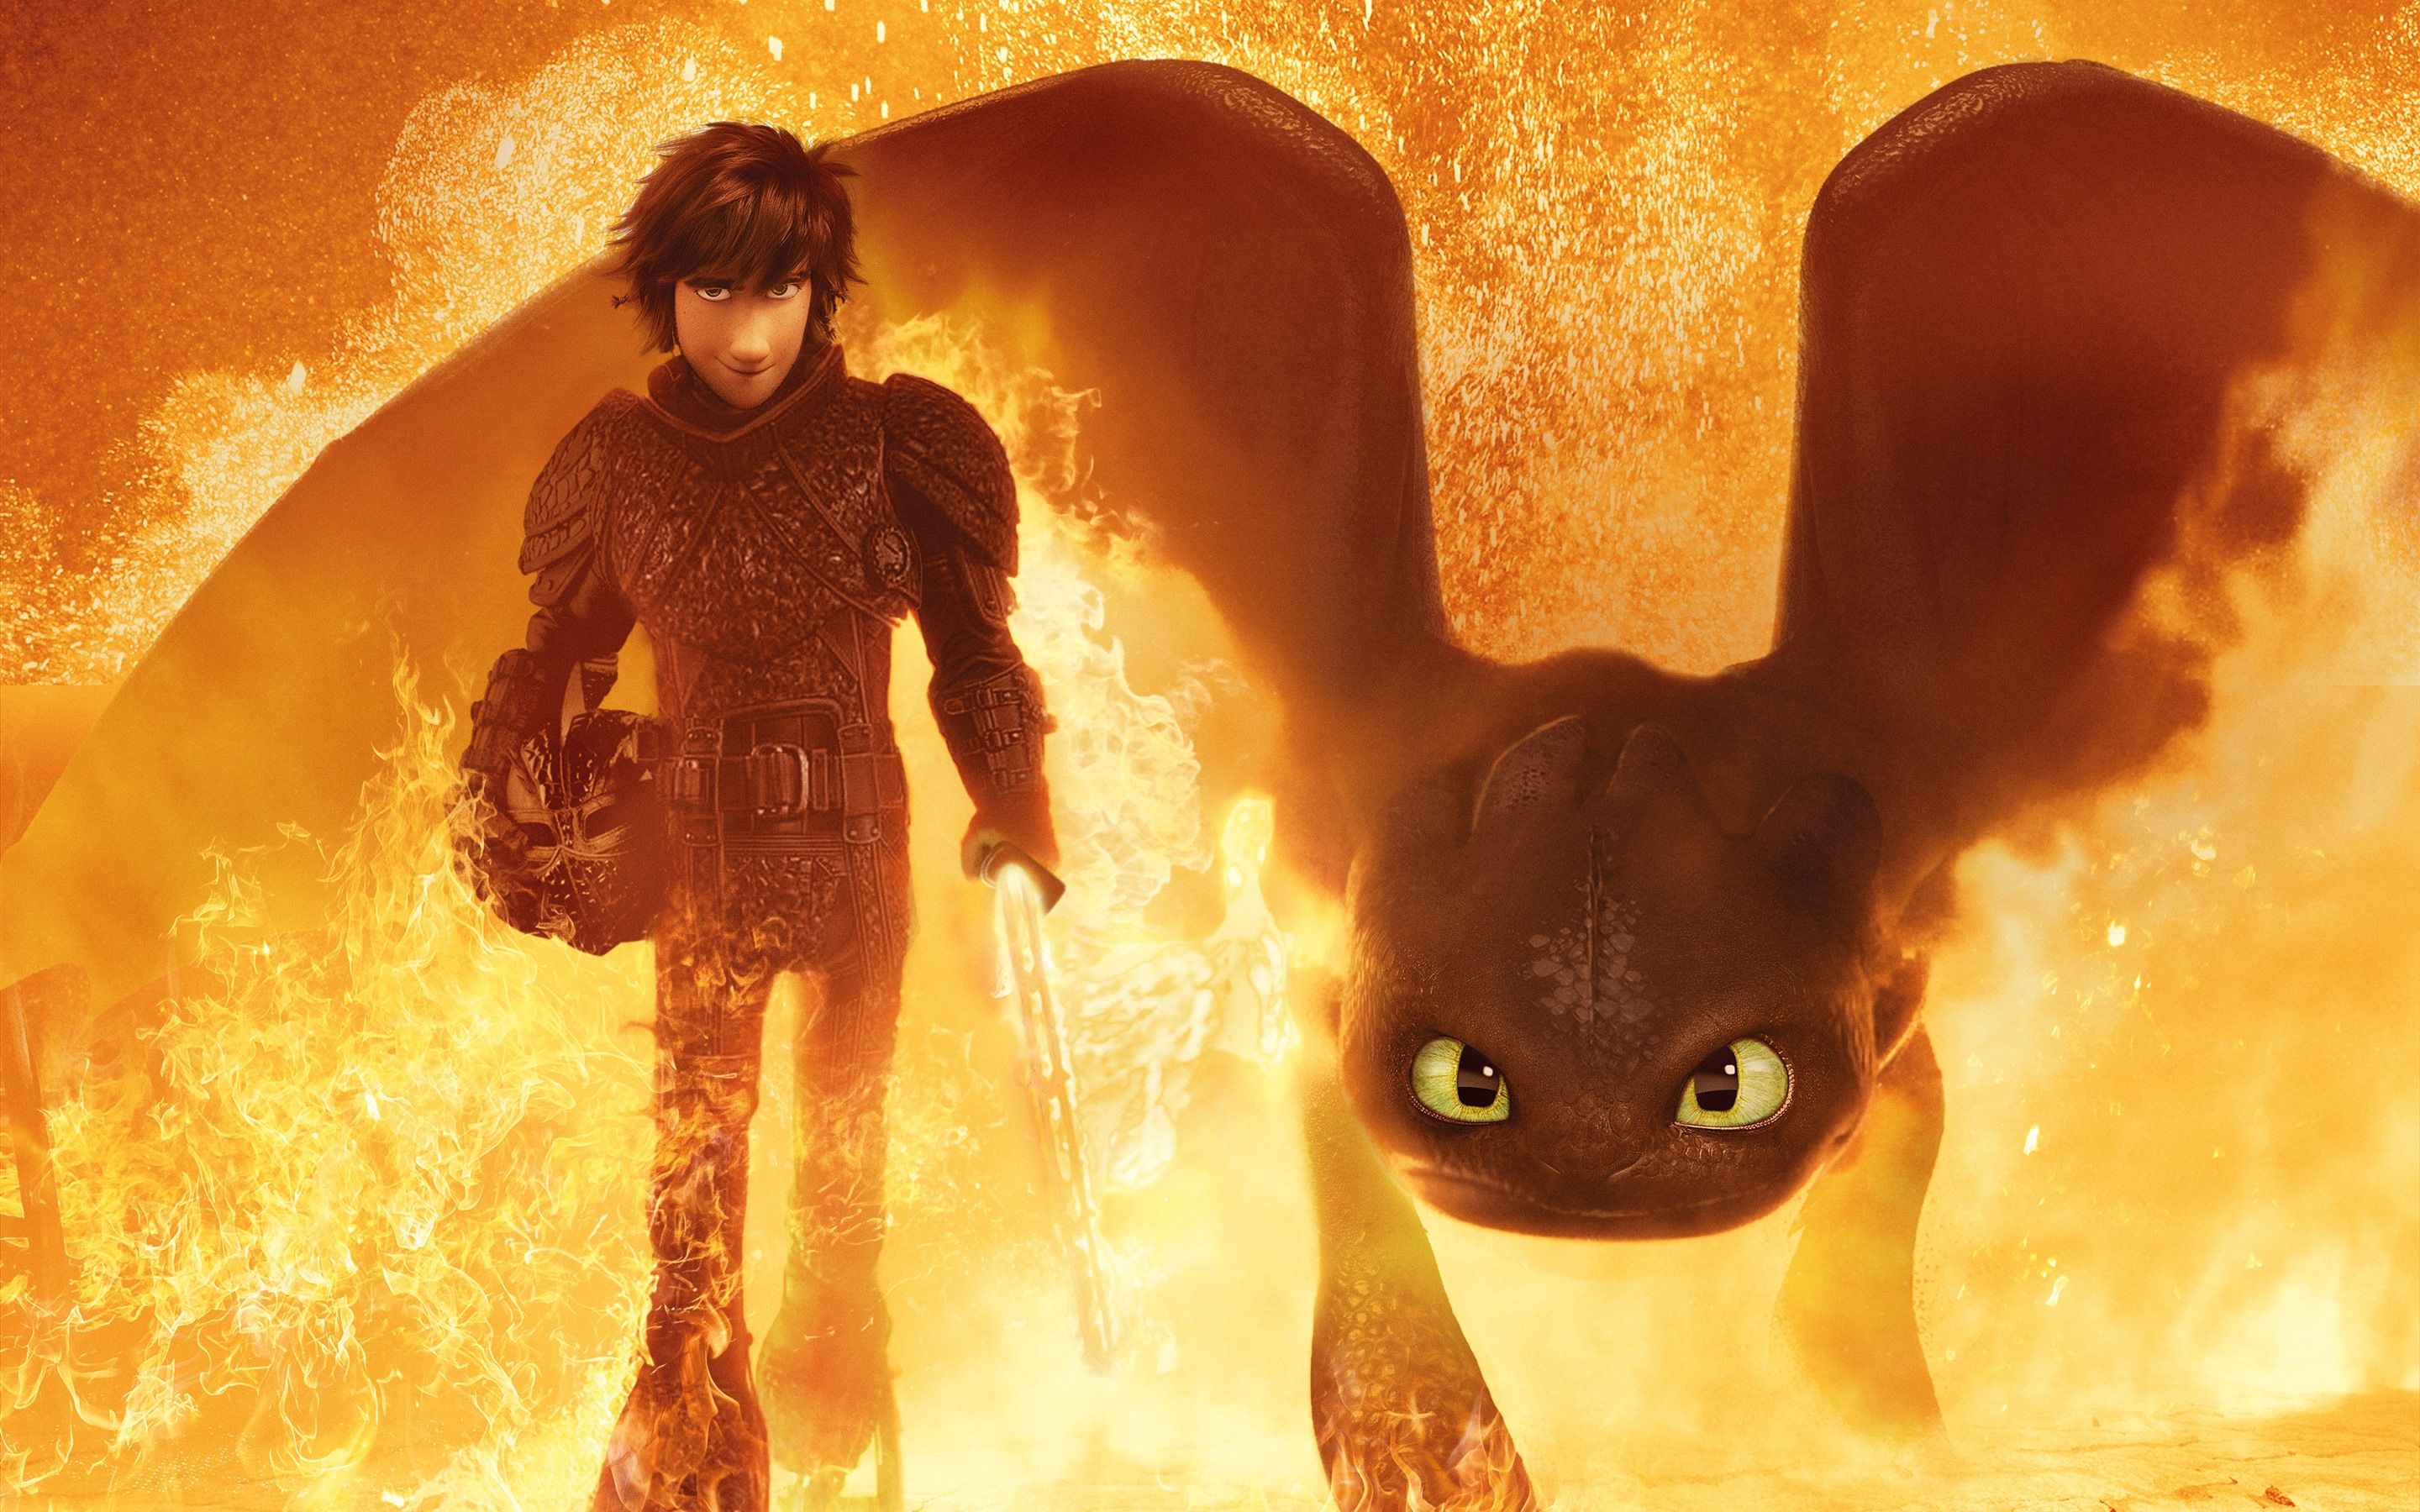 Wallpaper How to Train Your Dragon fire, sword 3840x2160 UHD 4K